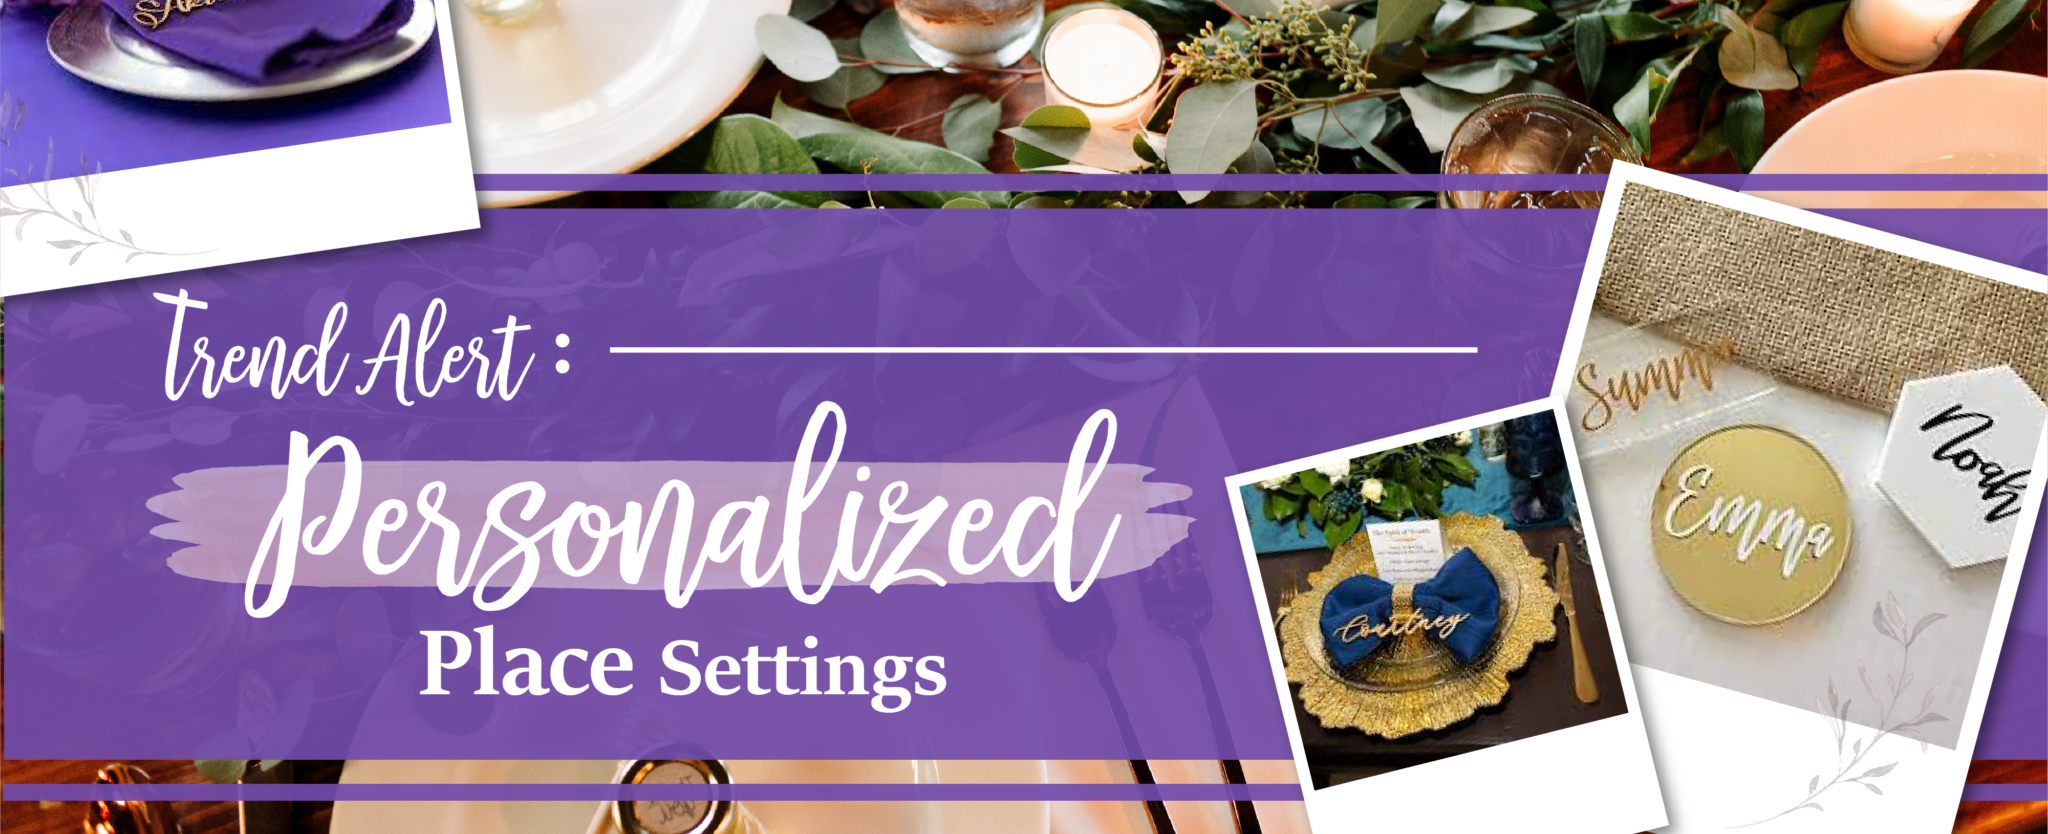 Trend Alert: Personalized Place Settings